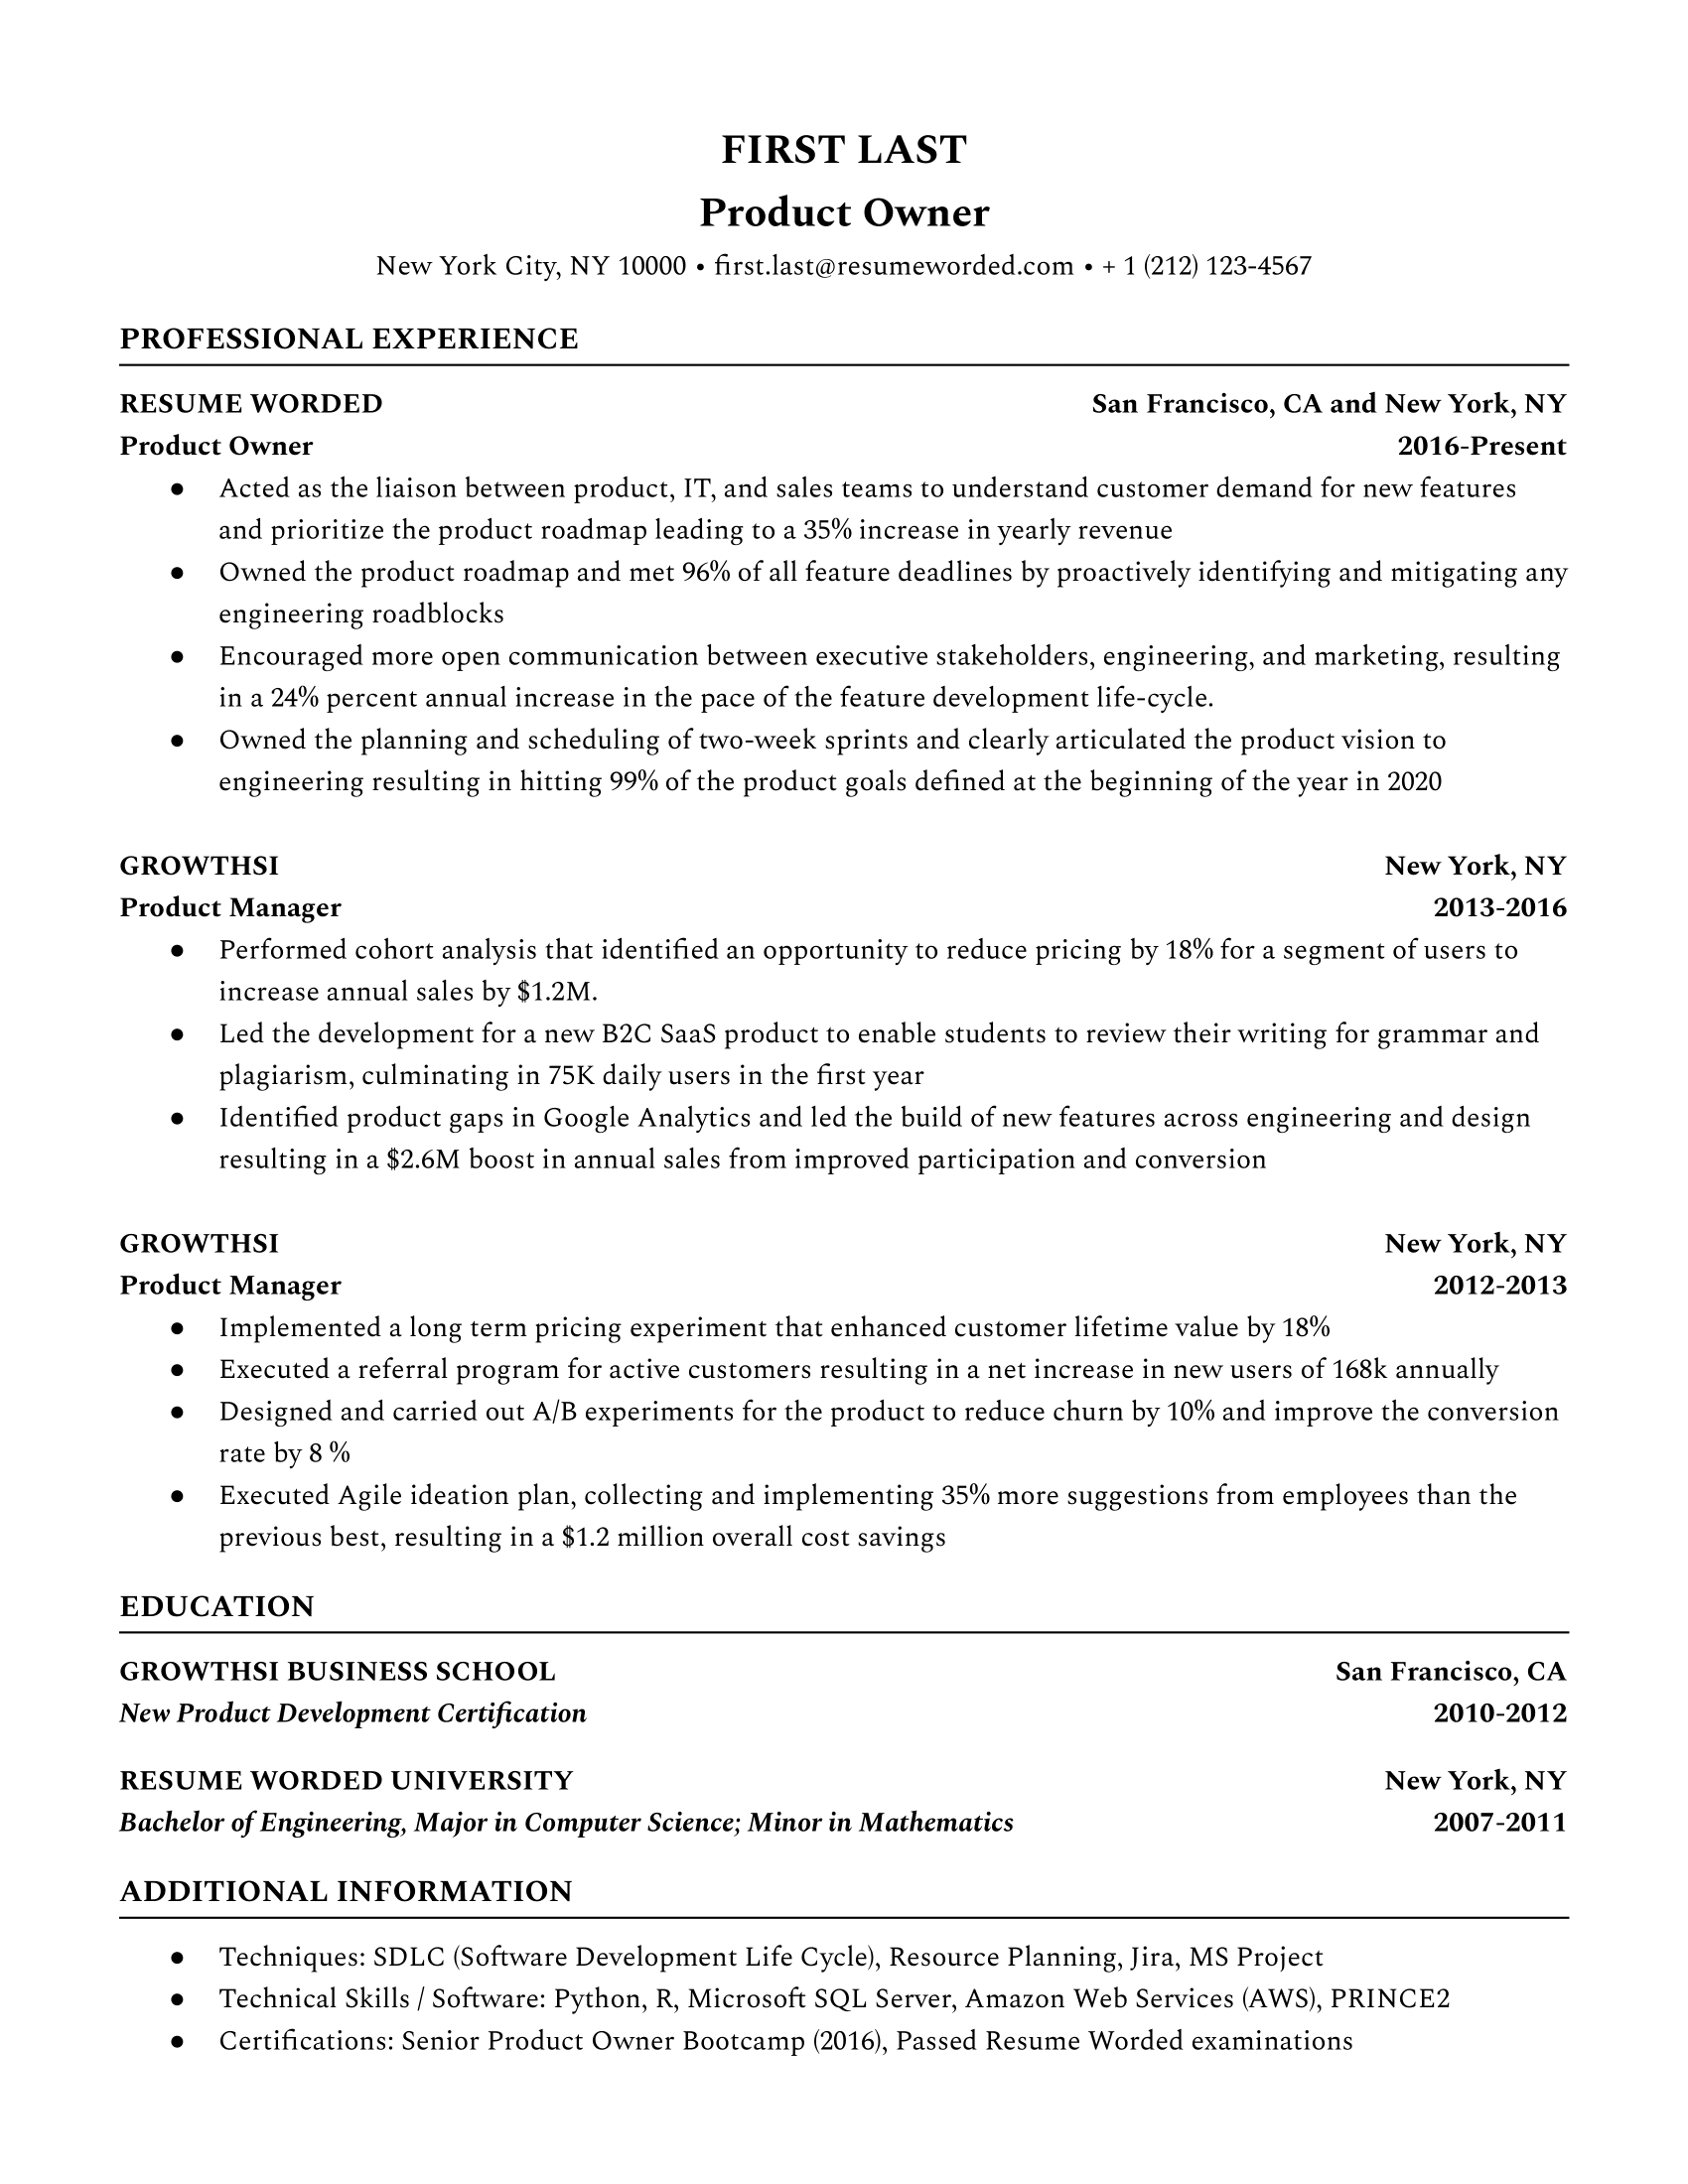 Relevant experience only - Analytics Manager Resume